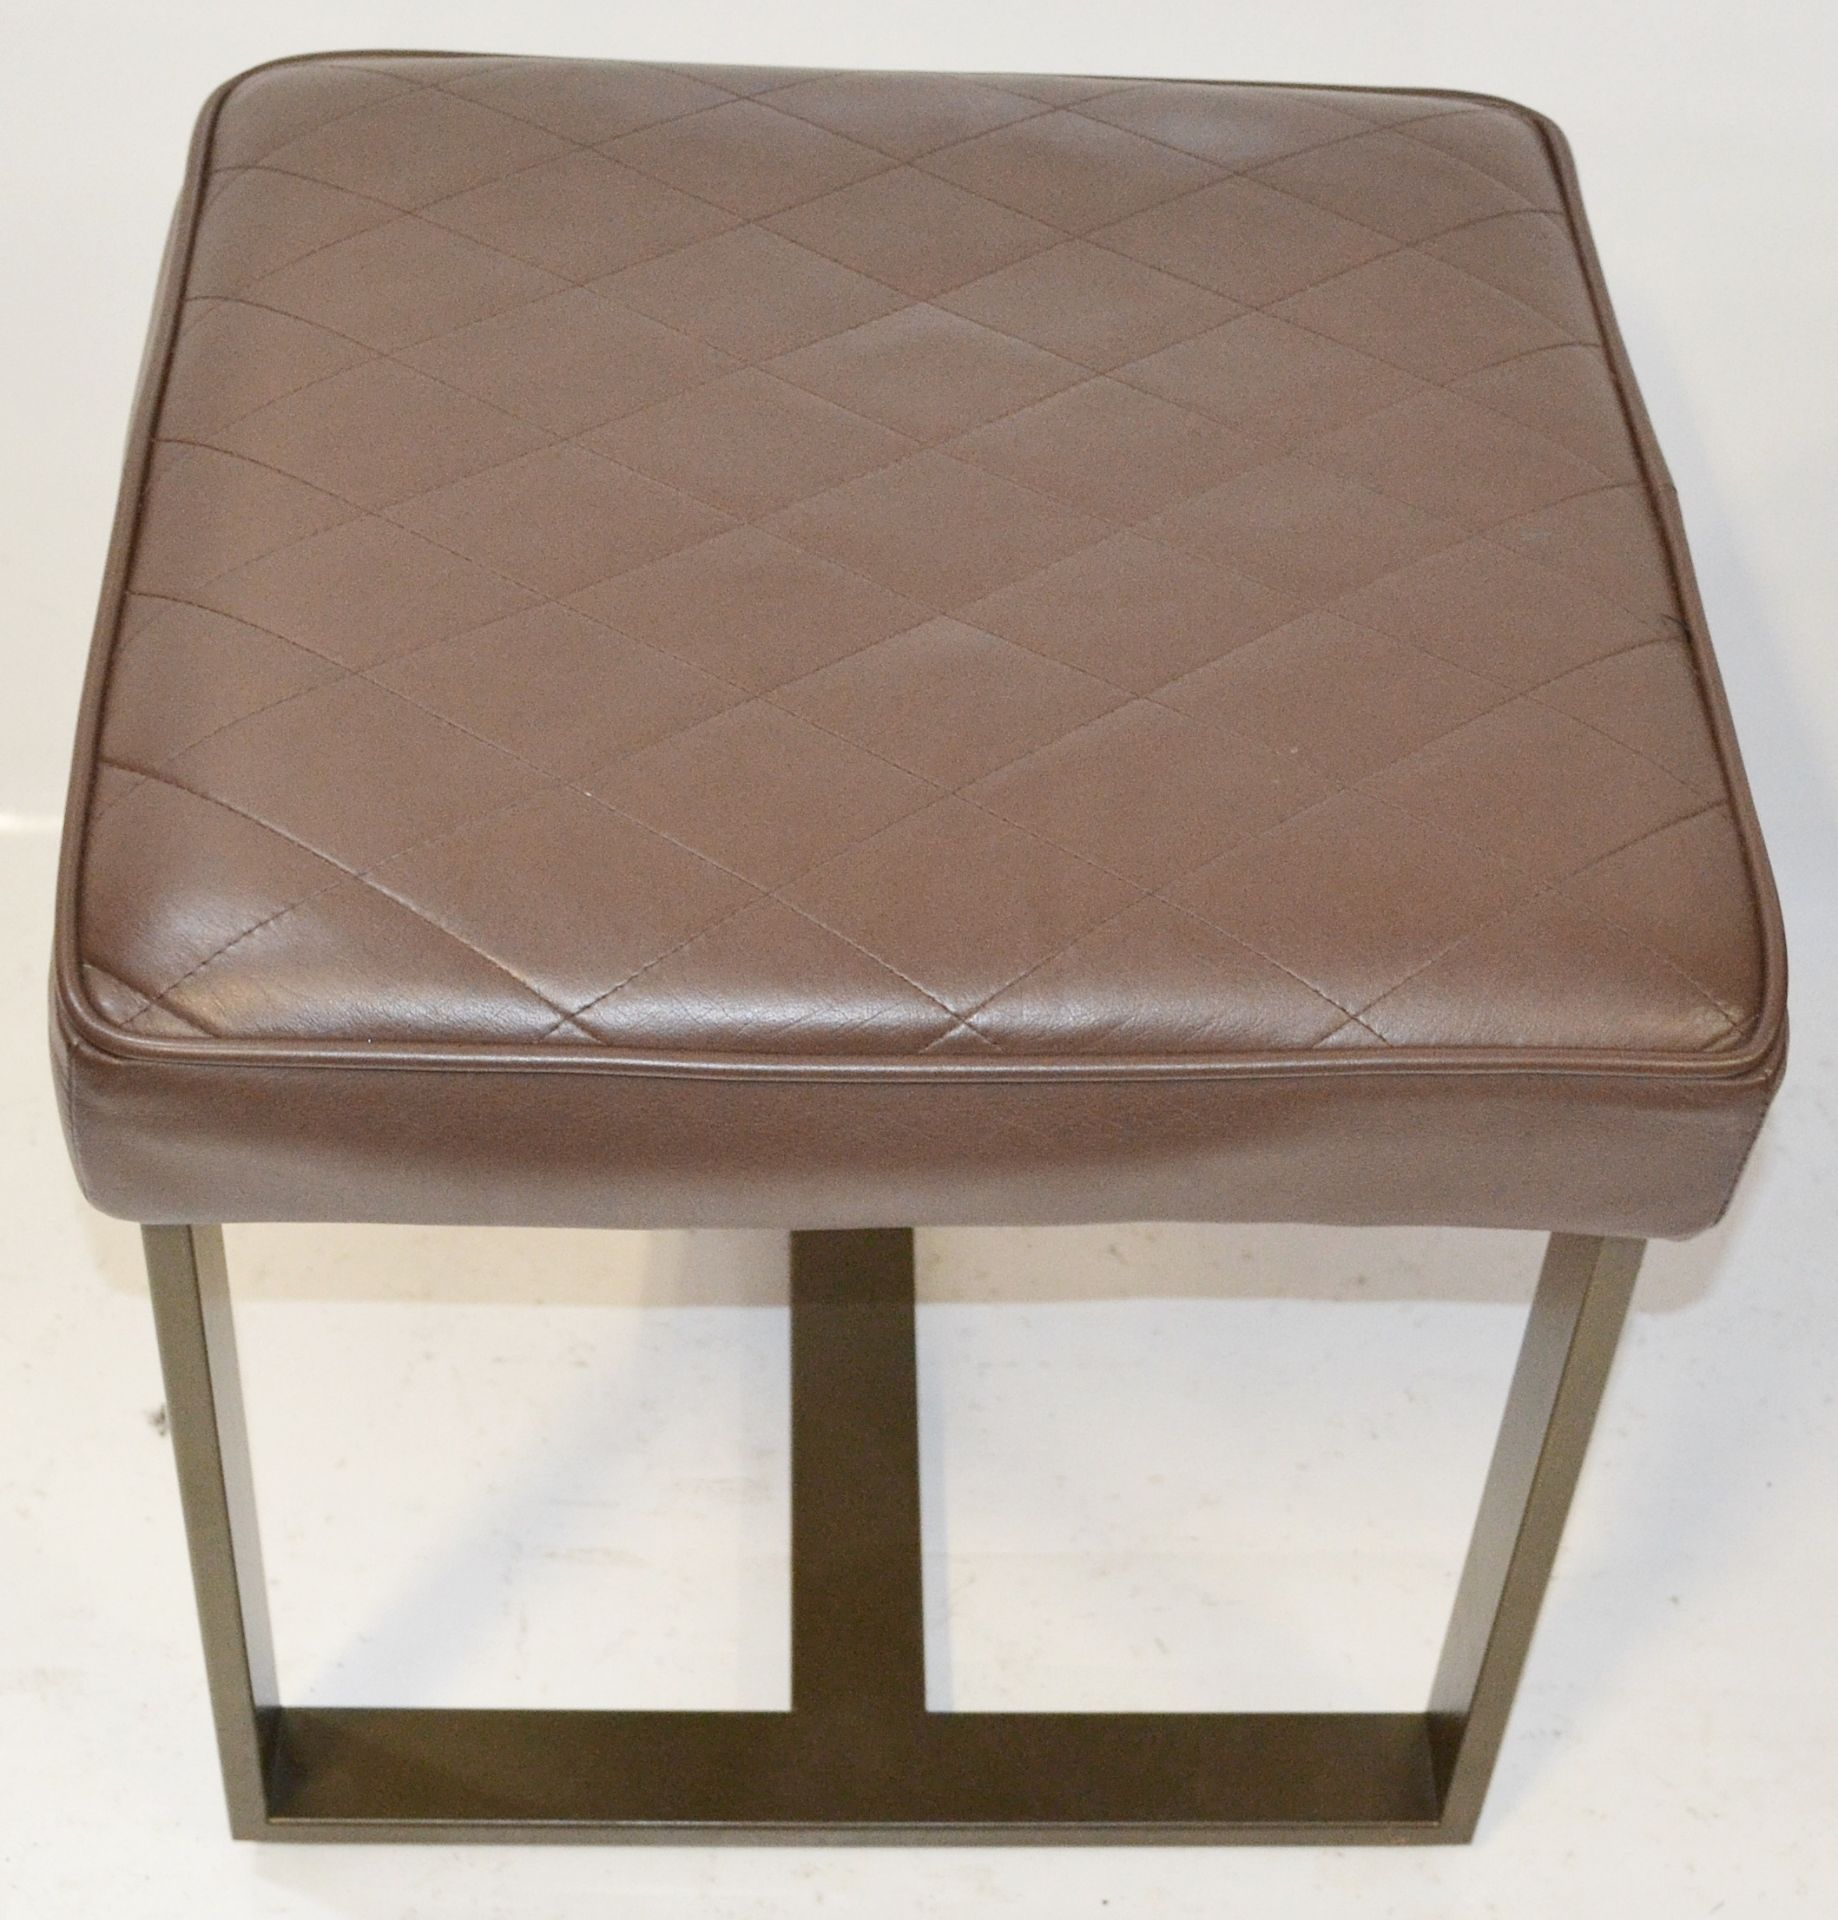 Pair Of Upholstered Stools In A Brown Faux Leather - Recently Removed From A Major UK Store In - Image 2 of 5